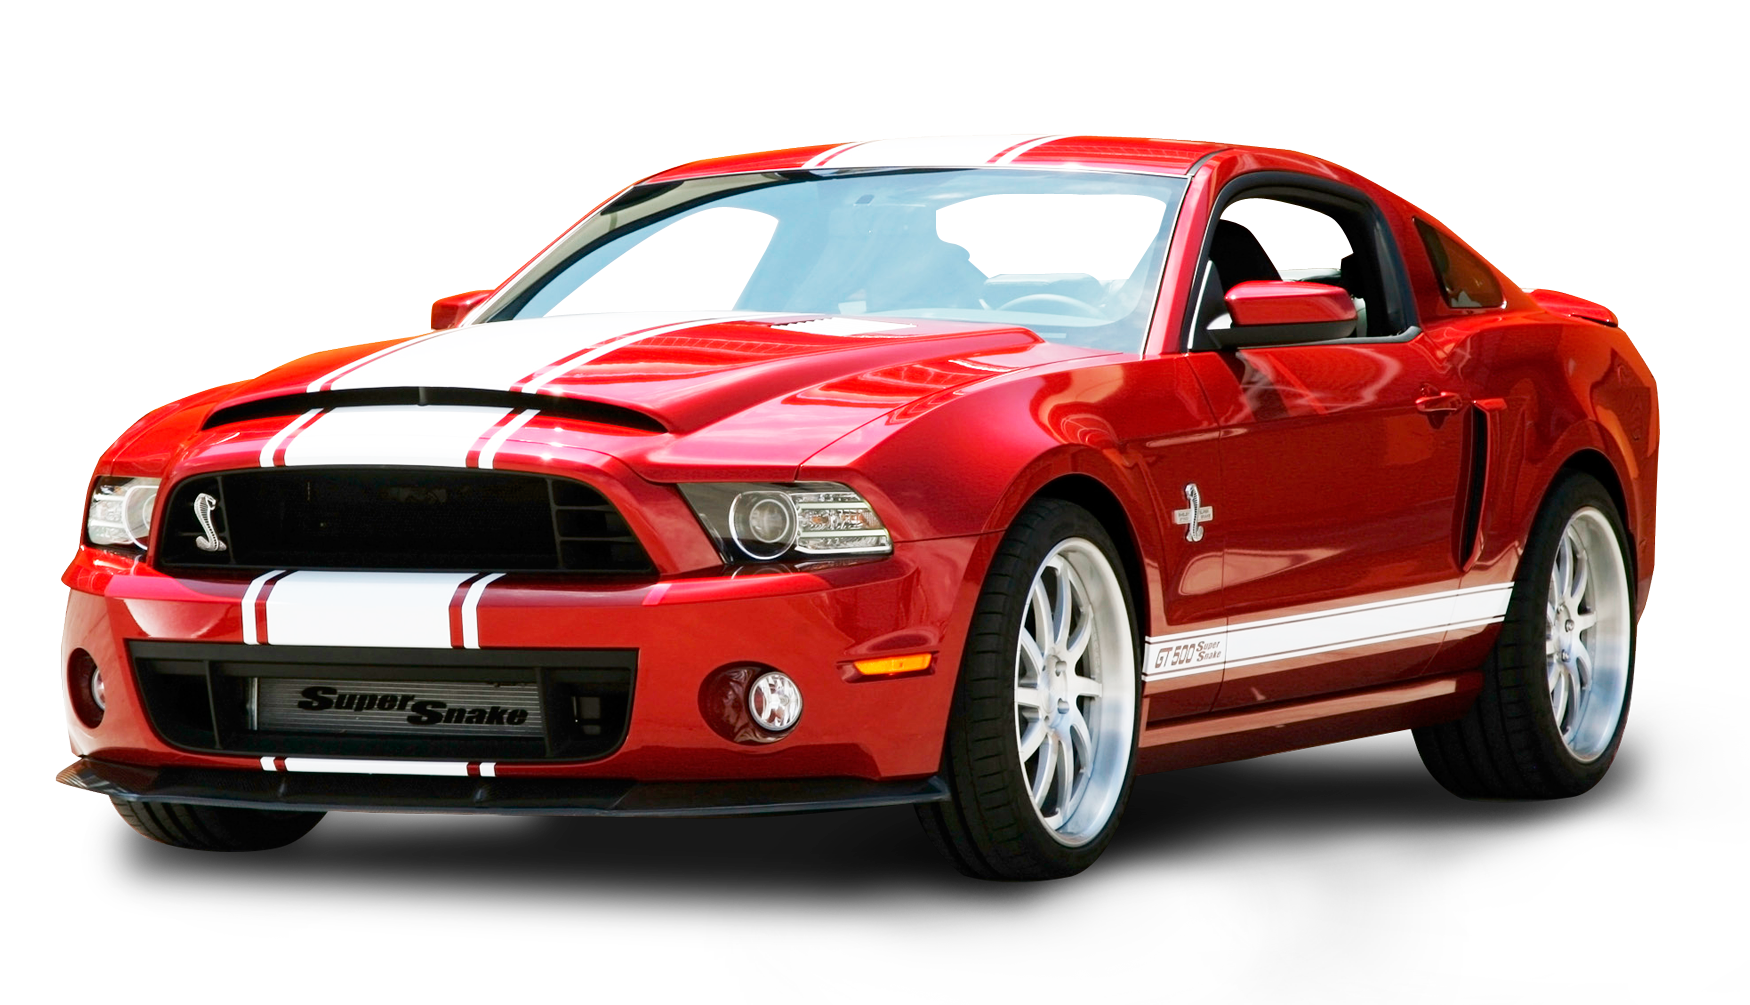 Gt500 Shelby Car Ford 2018 2017 Mustang Clipart